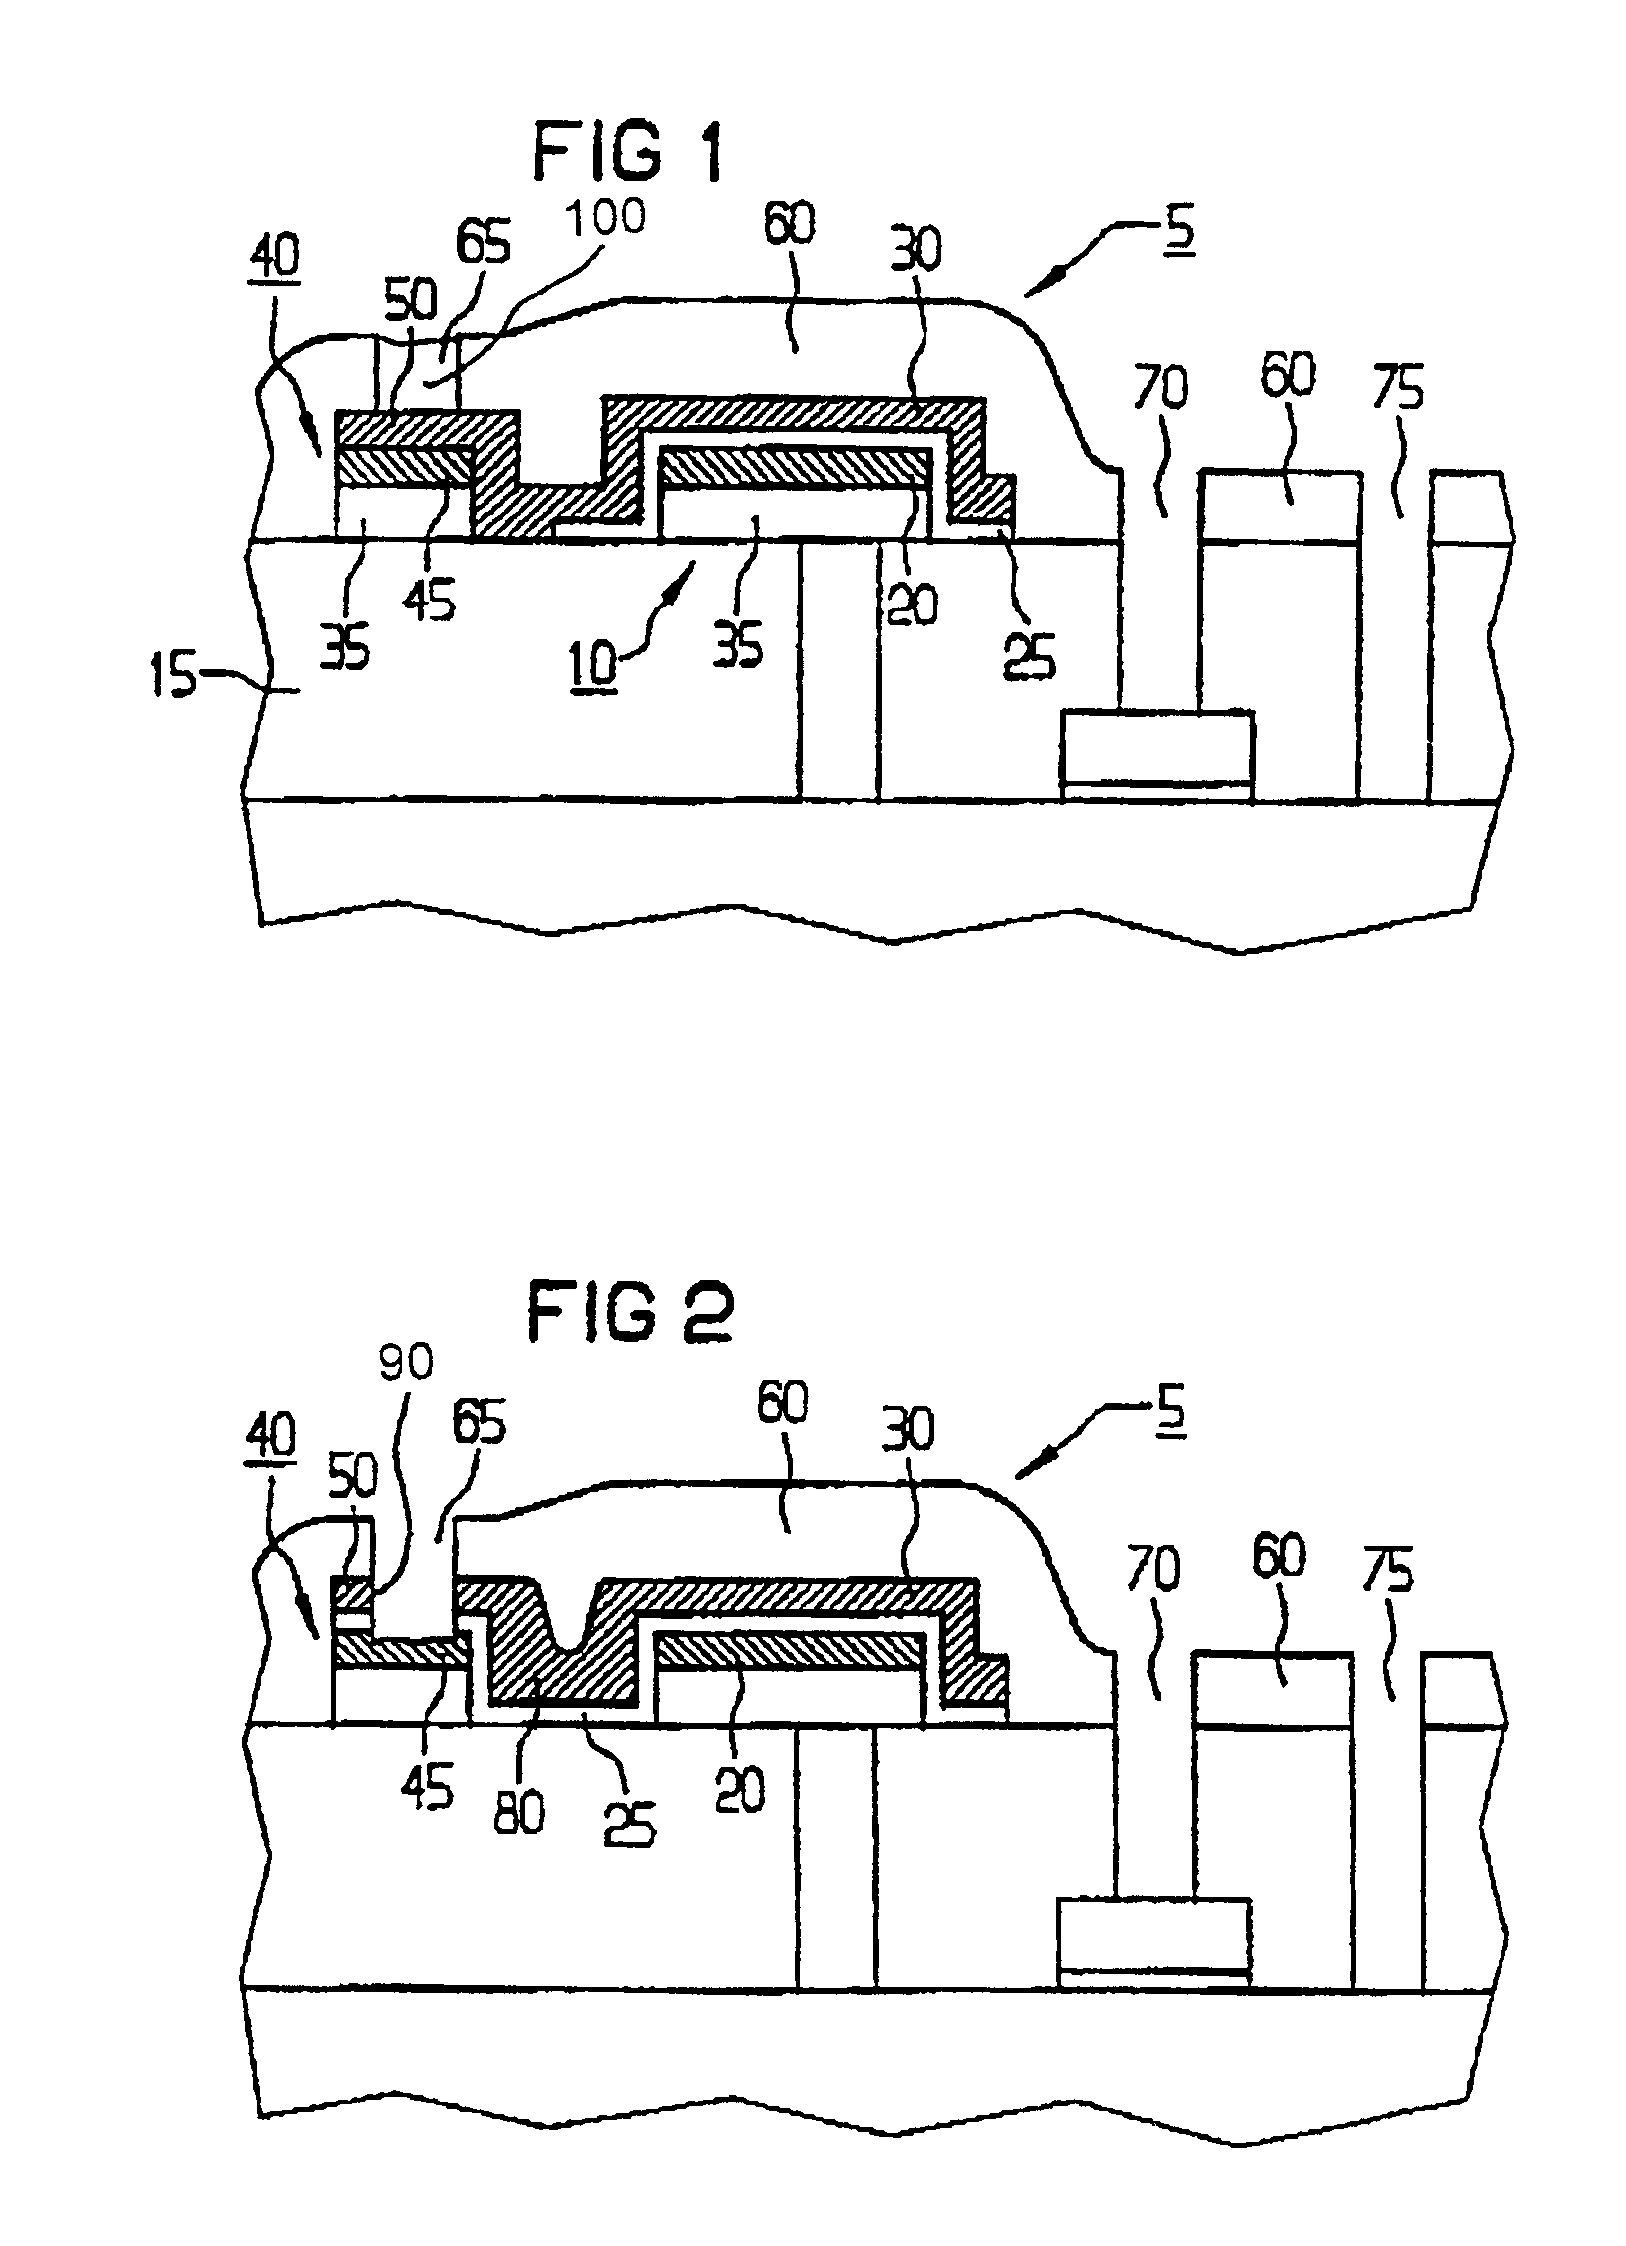 Semiconductor component having a material reinforced contact area